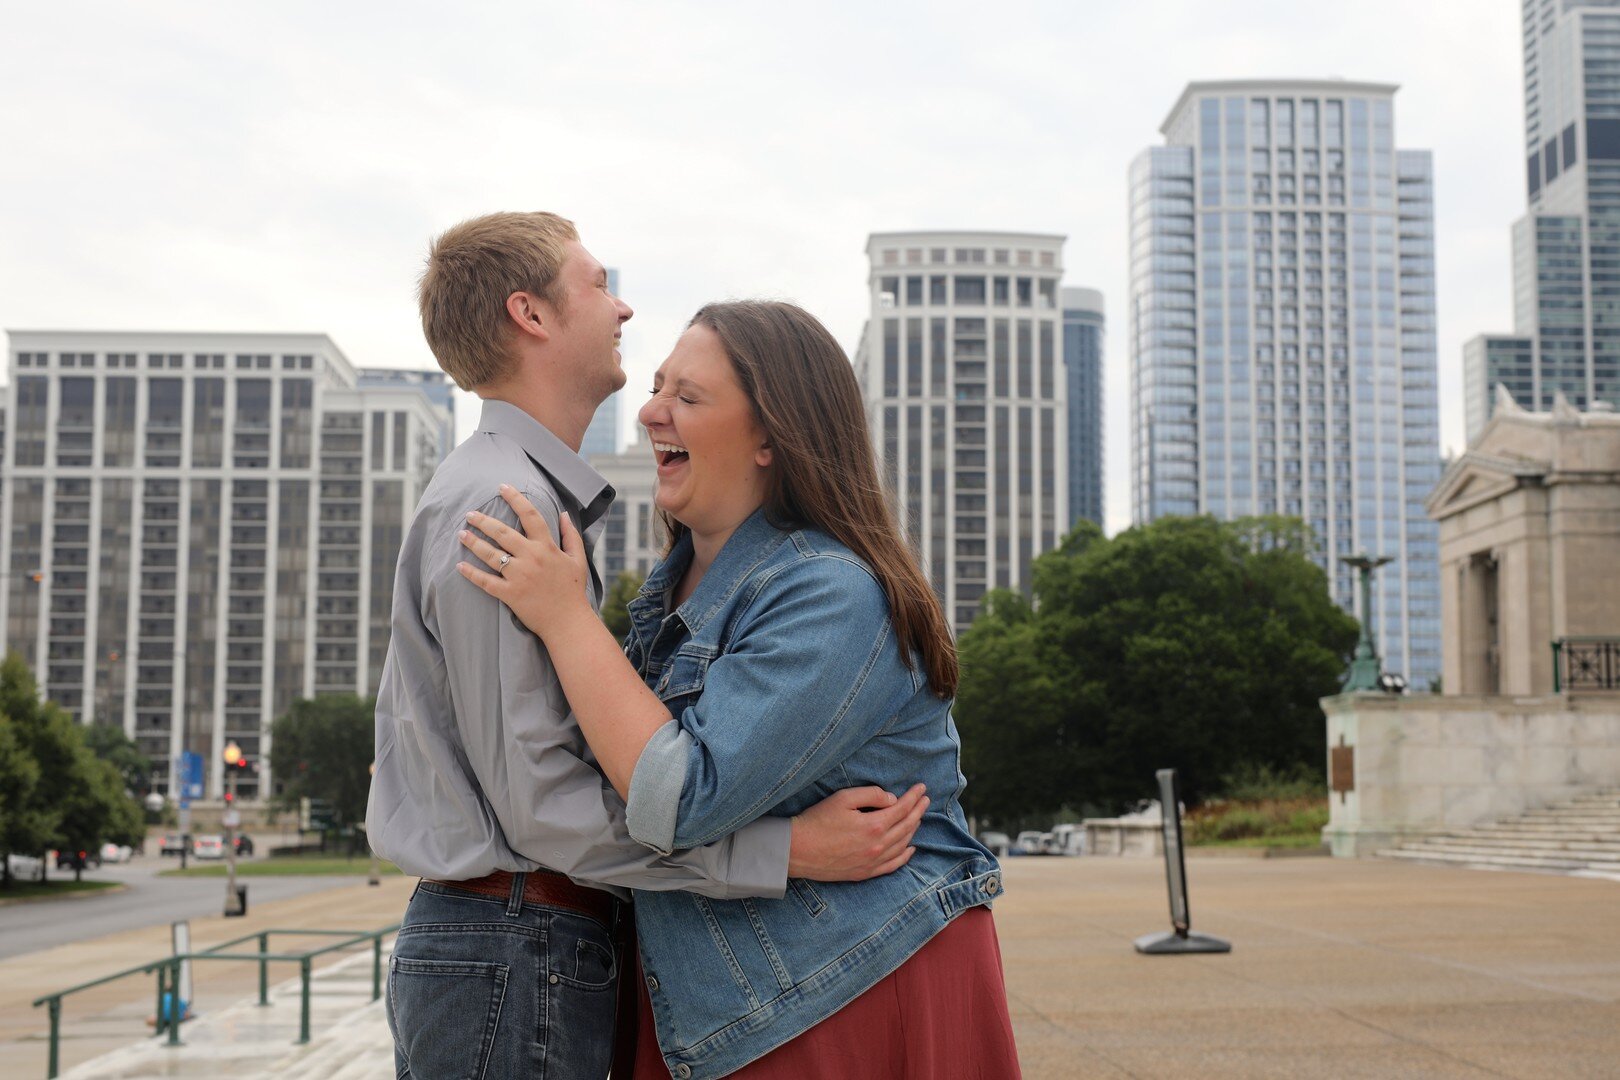 Casual Downtown Chicago Engagement Session captured by Messy Photography. See more engagement photo ideas at CHItheeWED.com!